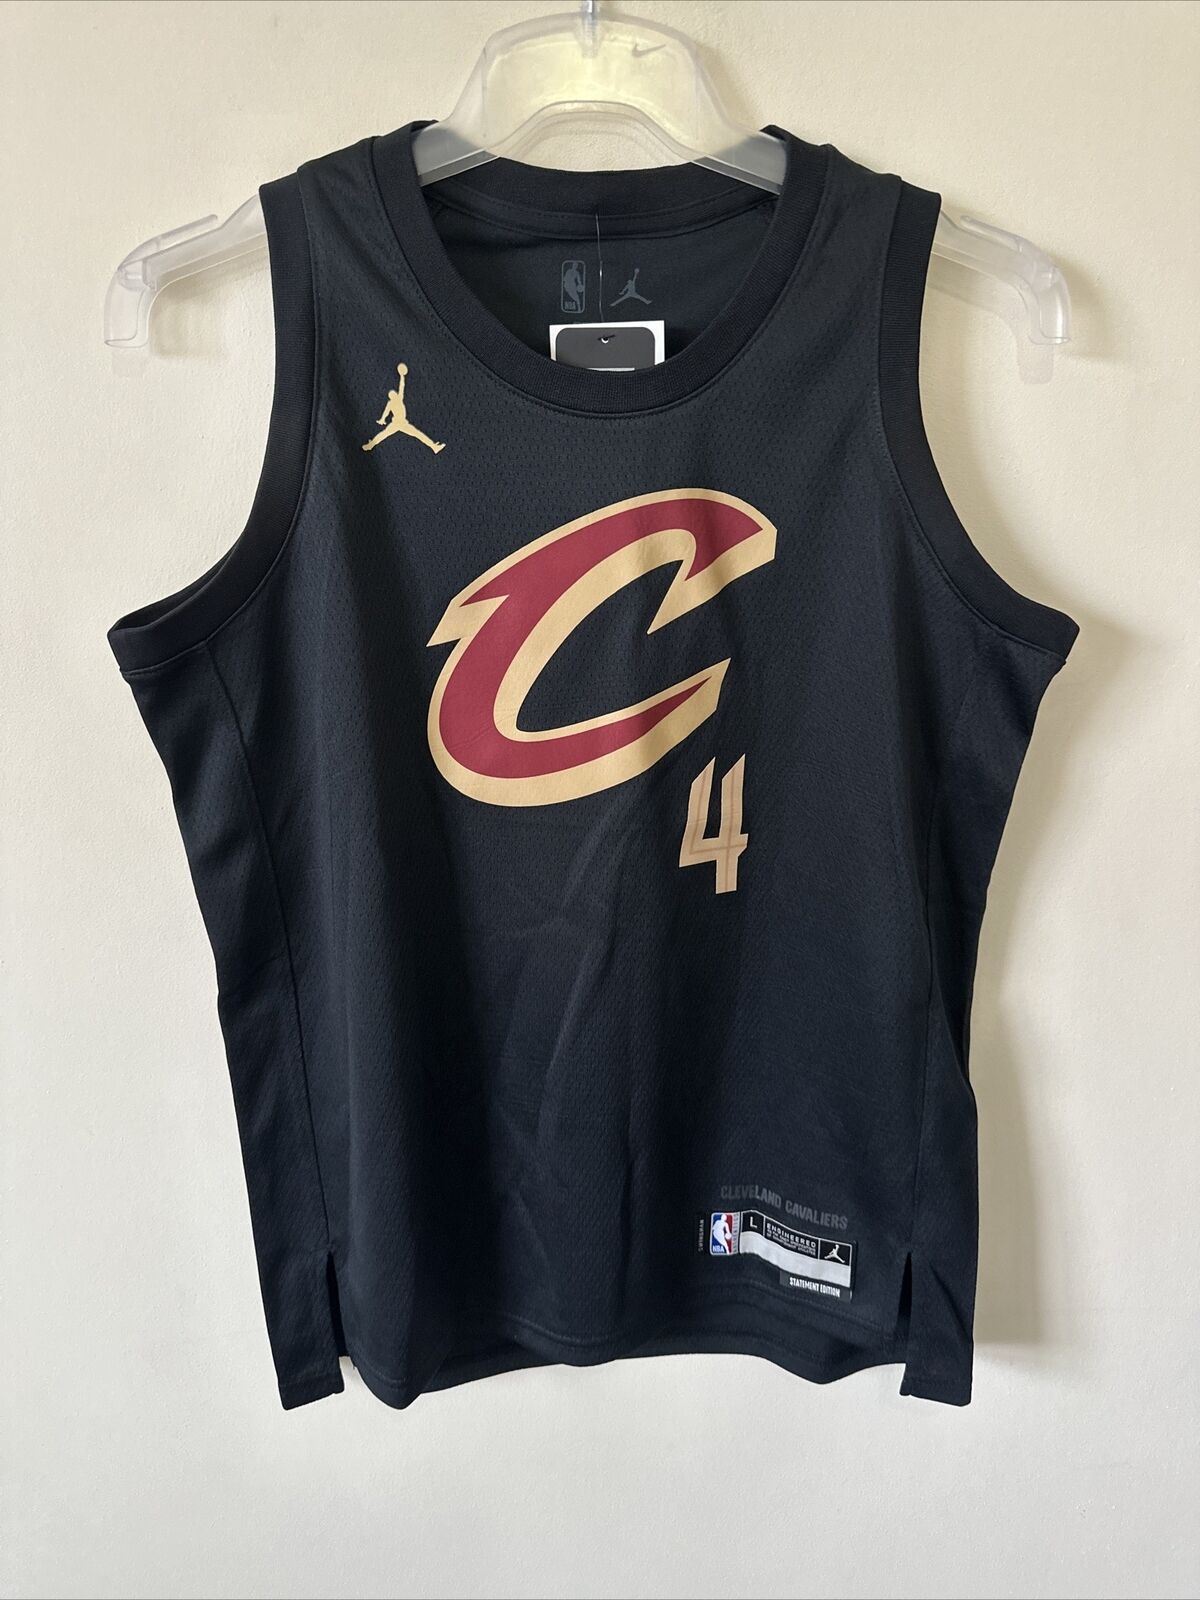 Nike NBA Cleveland Cavaliers Statement Edition Jersey MOBLEY Junior Size Large